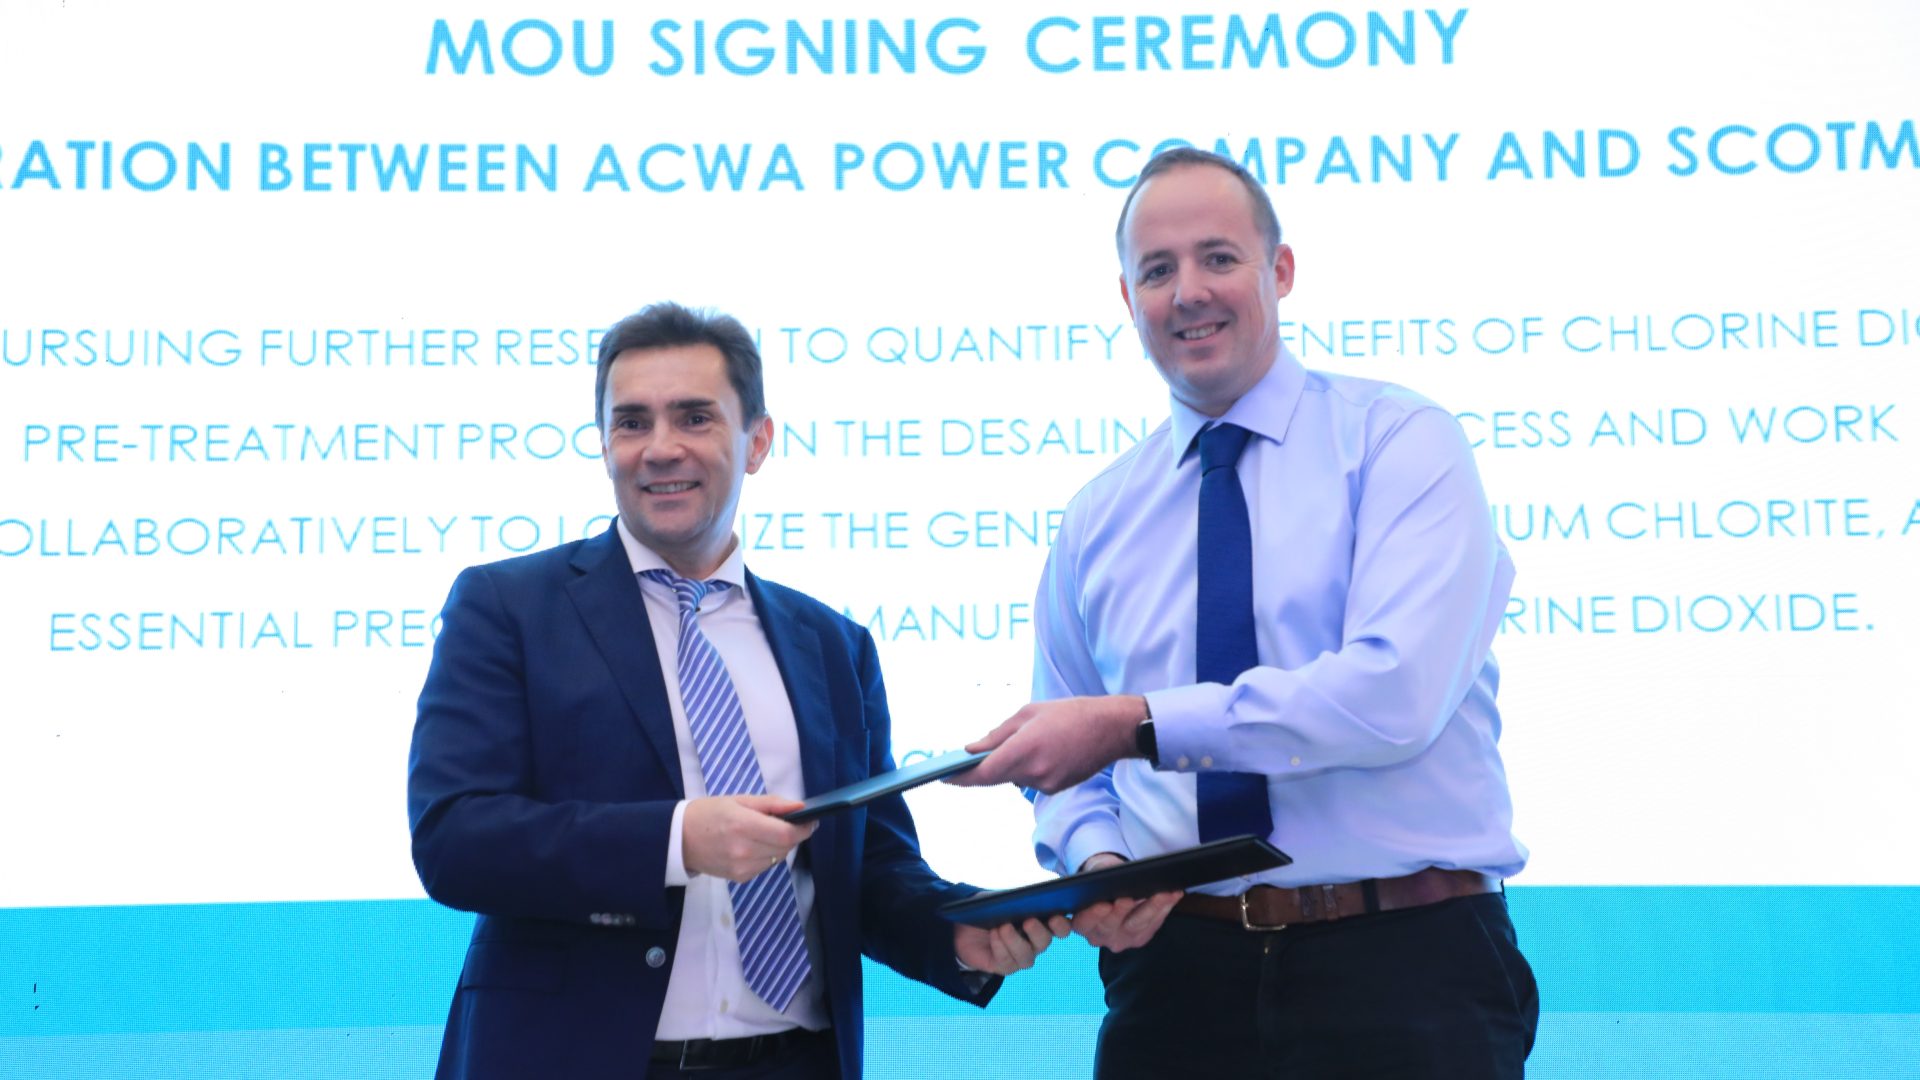 Thomas Altmann, Executive Vice President of Innovation at ACWA Power (left) with Alistair Cameron, CEO of Scotmas signing the Memorandum of Understanding.